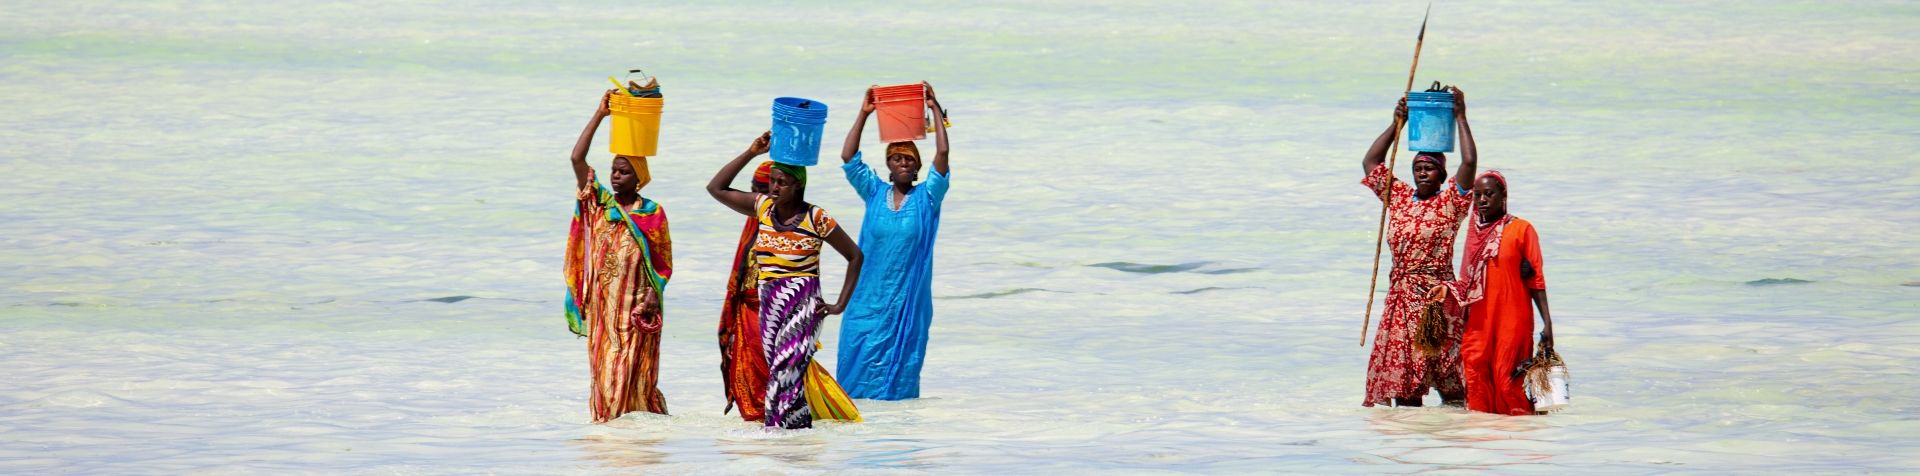 6 Senegalese women wearing brightly colored dresses and skirts carrying colorful buckets on their heads and wading through water.